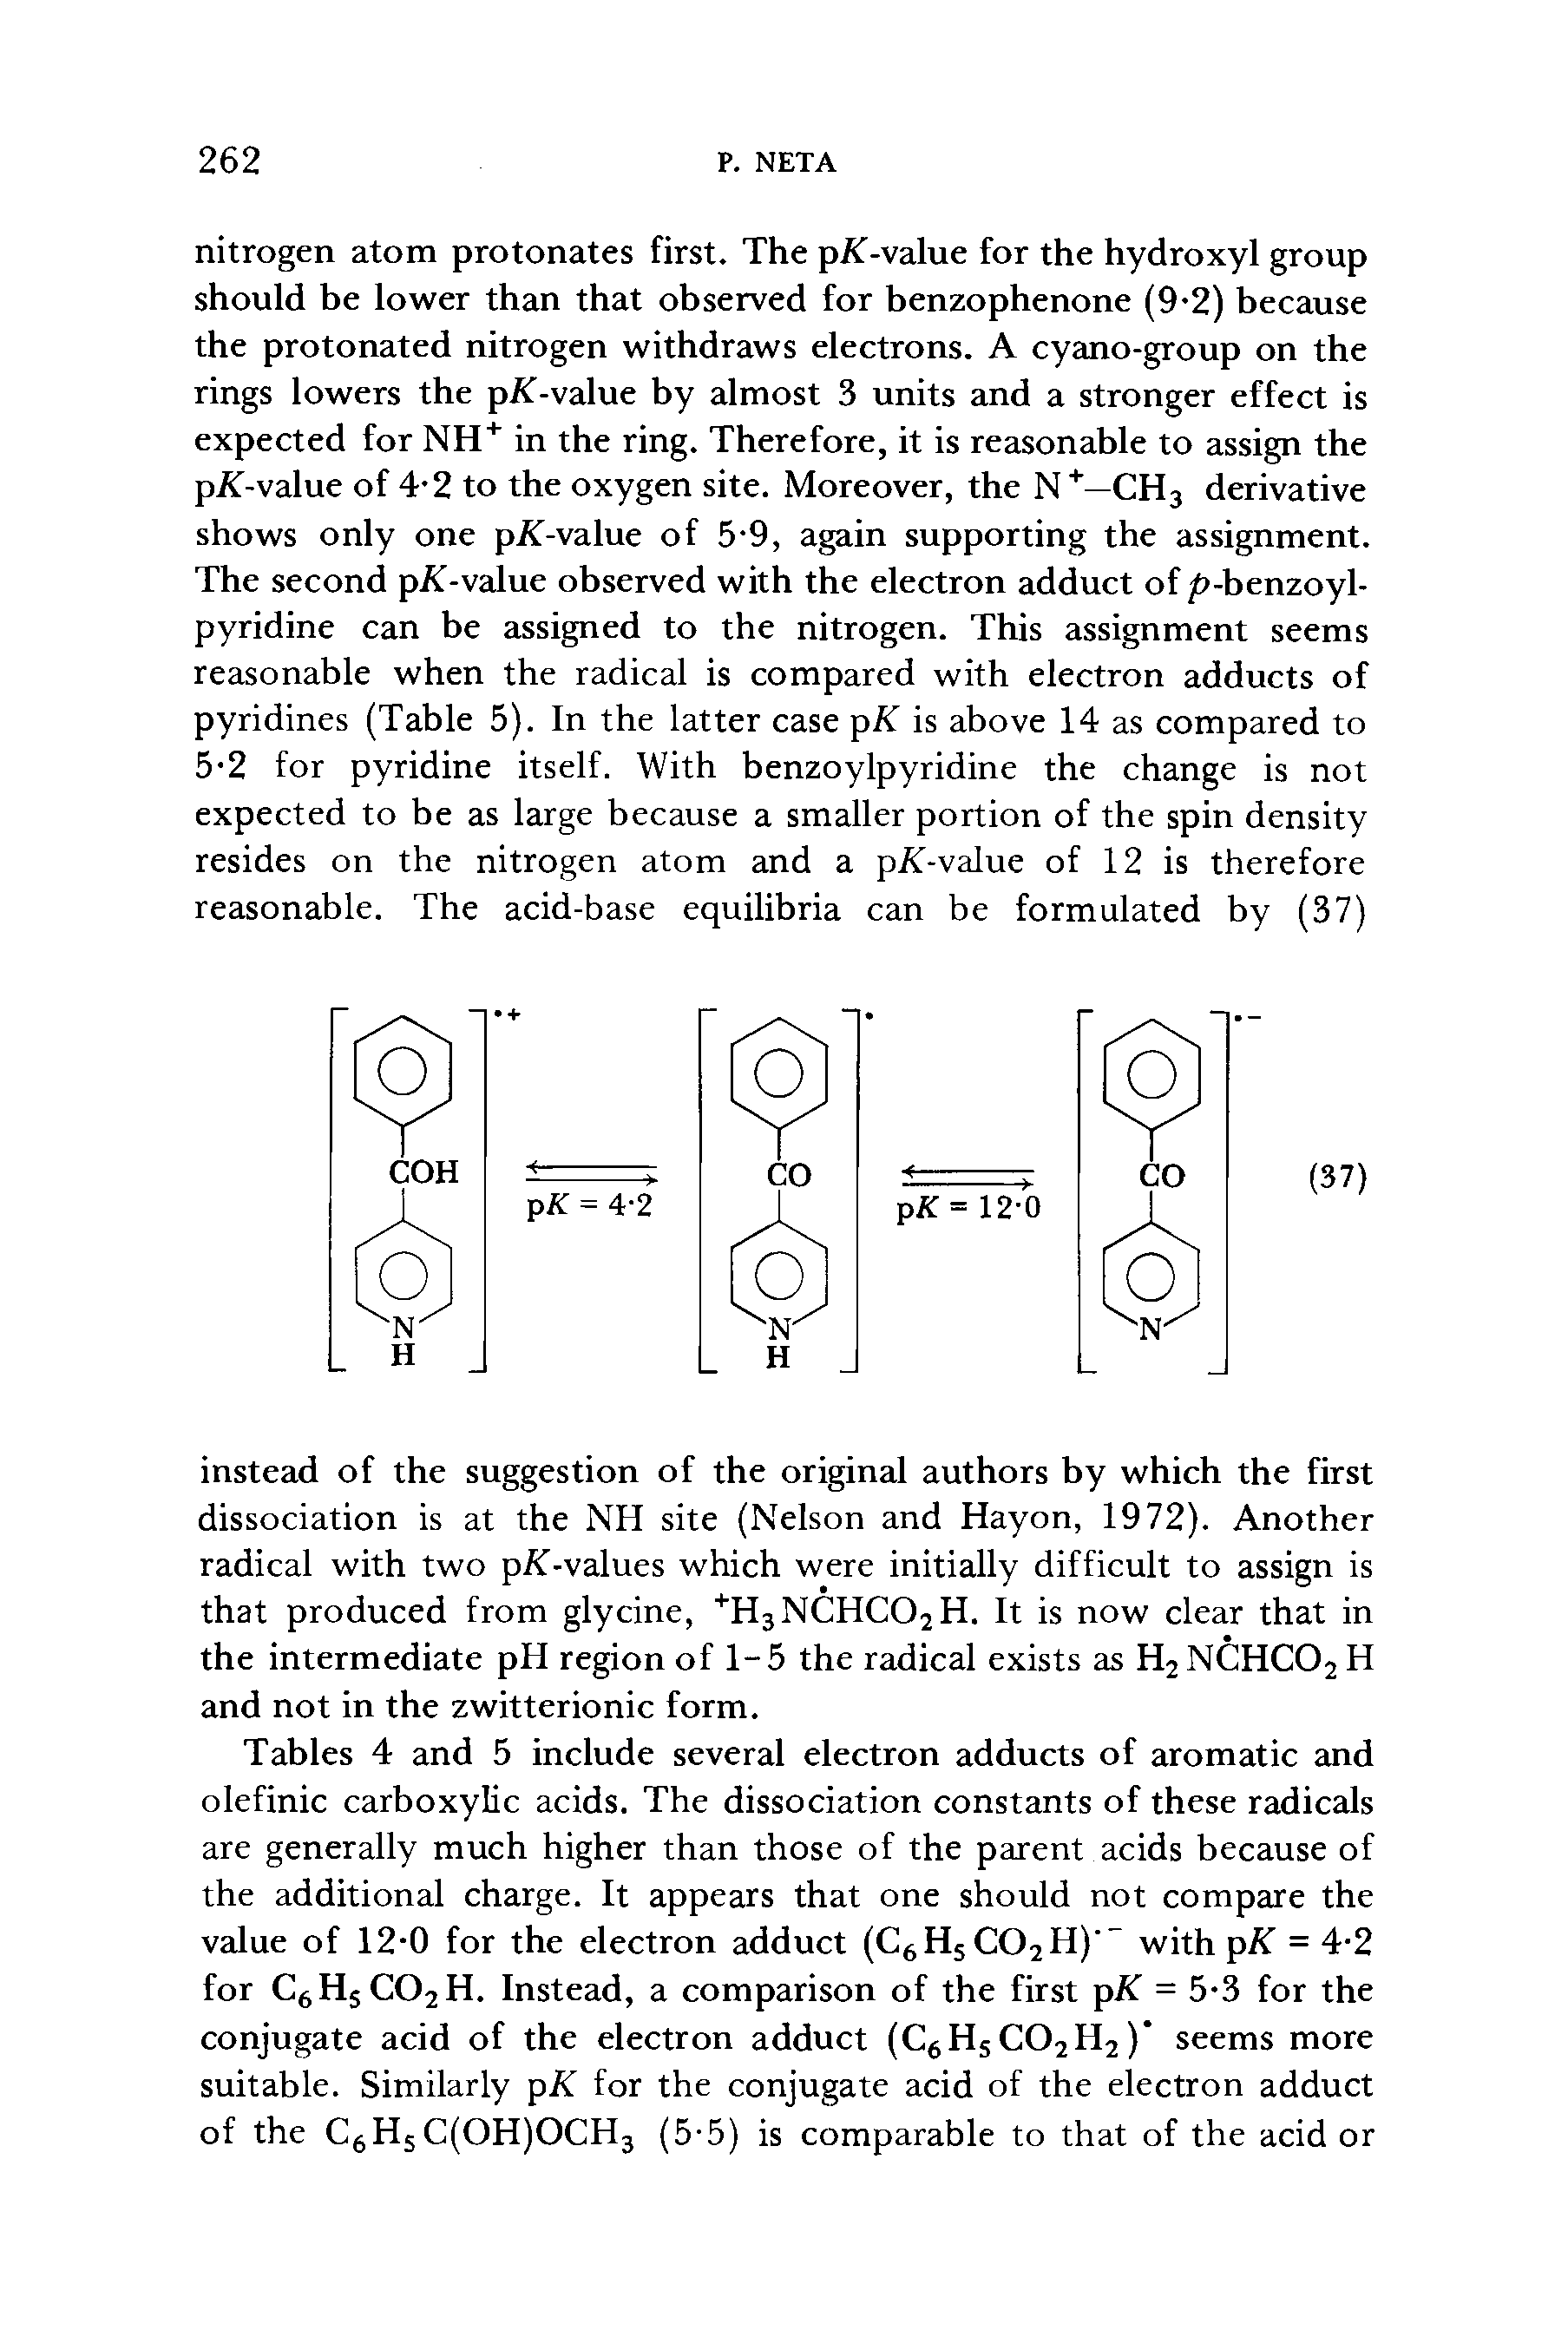 Tables 4 and 5 include several electron adducts of aromatic and olefinic carboxylic acids. The dissociation constants of these radicals are generally much higher than those of the parent acids because of the additional charge. It appears that one should not compare the value of 12-0 for the electron adduct (C6H5C02H) with pK = 4-2 for C6HsC02H. Instead, a comparison of the first pA = 5 3 for the conjugate acid of the electron adduct (C6HsC02H2)" seems more suitable. Similarly pK for the conjugate acid of the electron adduct of the C6HsC(OH)OCH3 (5-5) is comparable to that of the acid or...